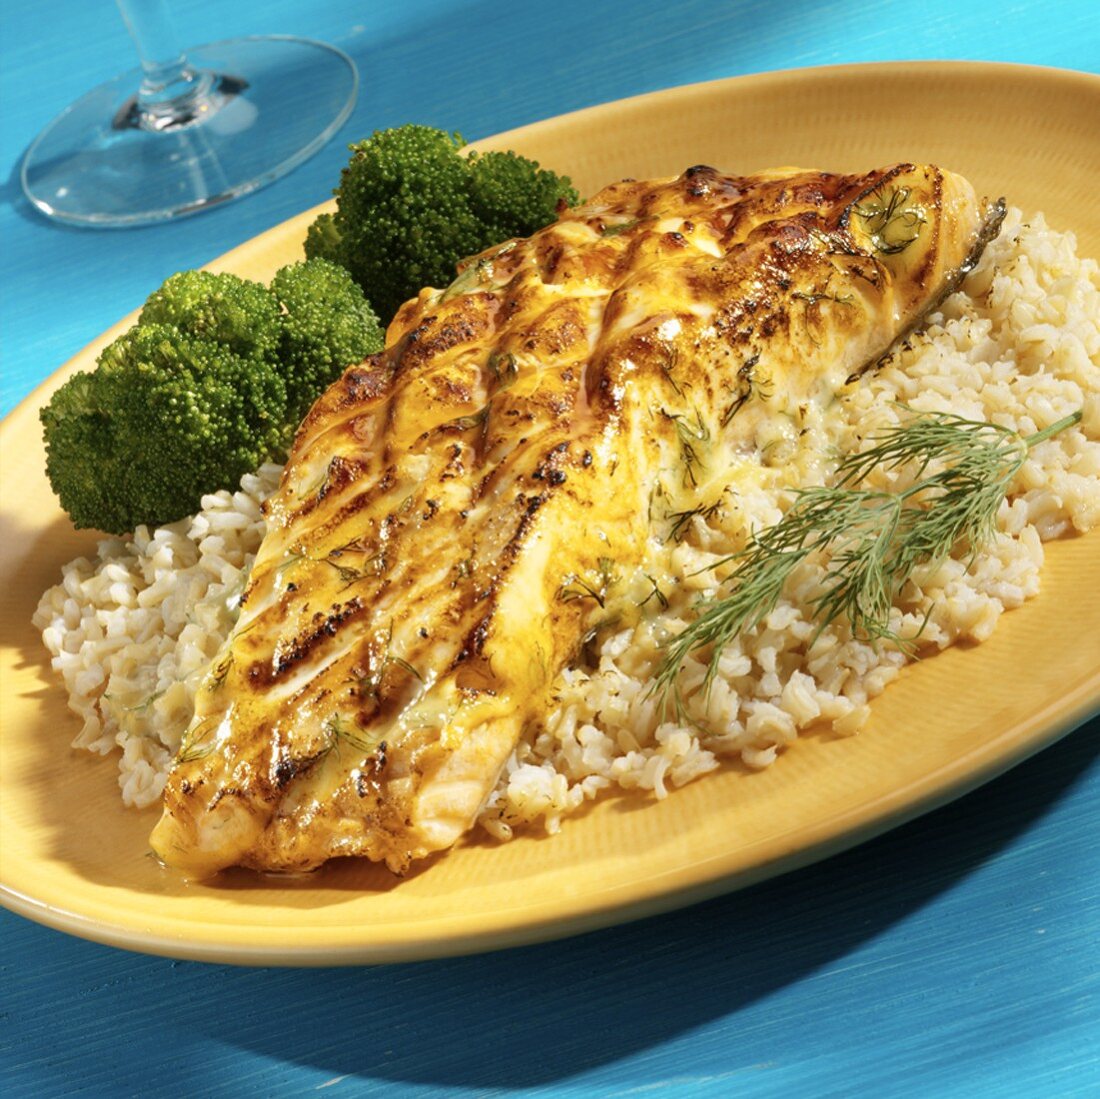 Grilled Salmon Fillet with Mustard Dill Sauce Over Brown Rice